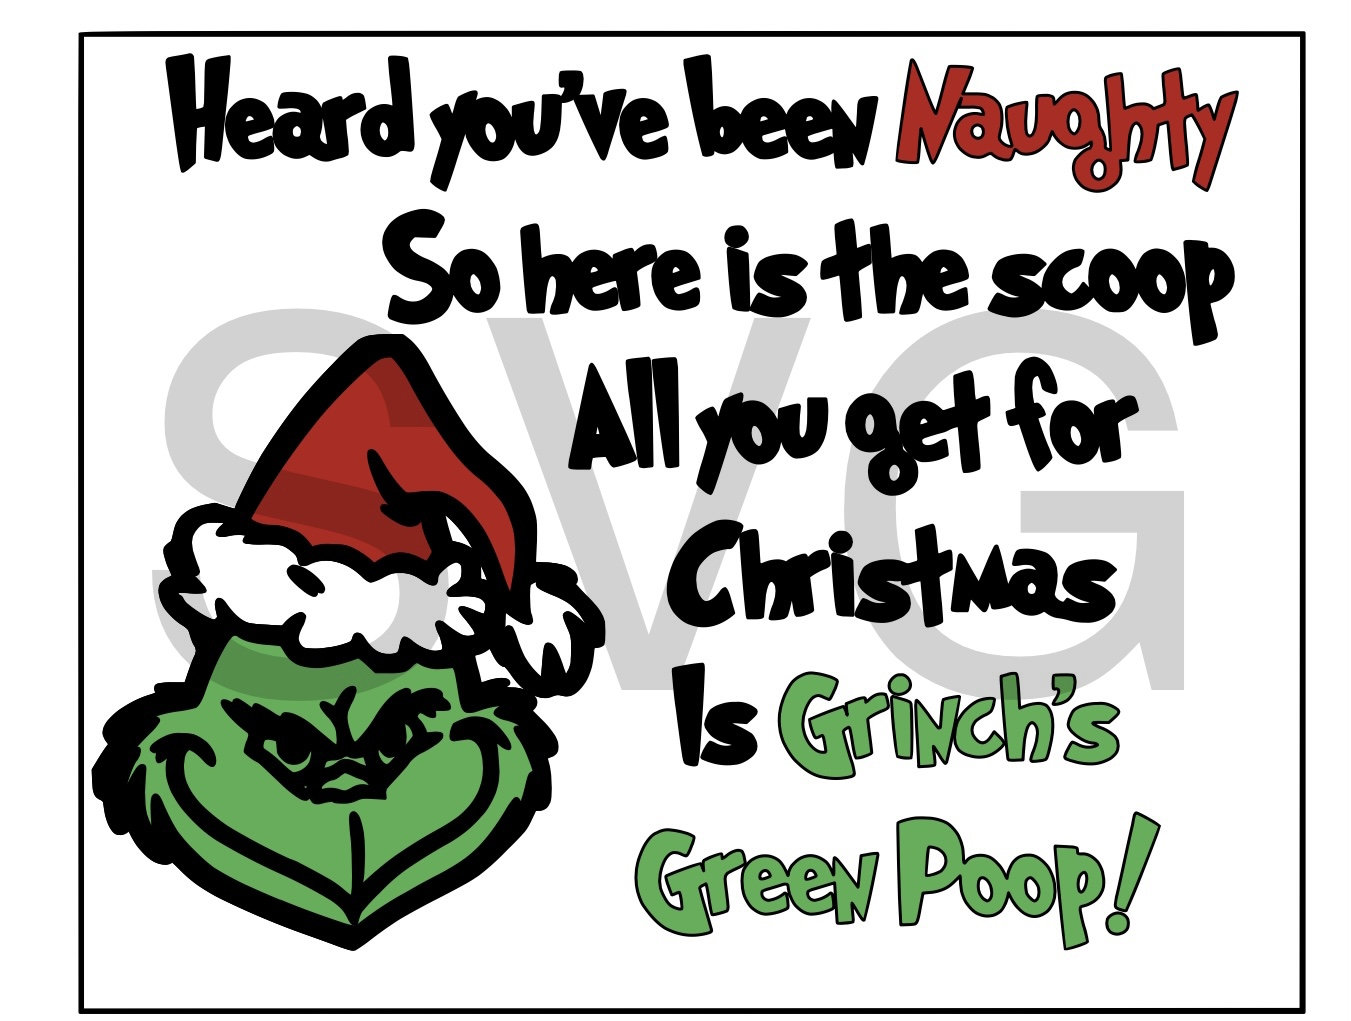 printable-grinch-poo-pourri-label-for-elf-on-the-shelf-grinch-my-xxx-hot-girl